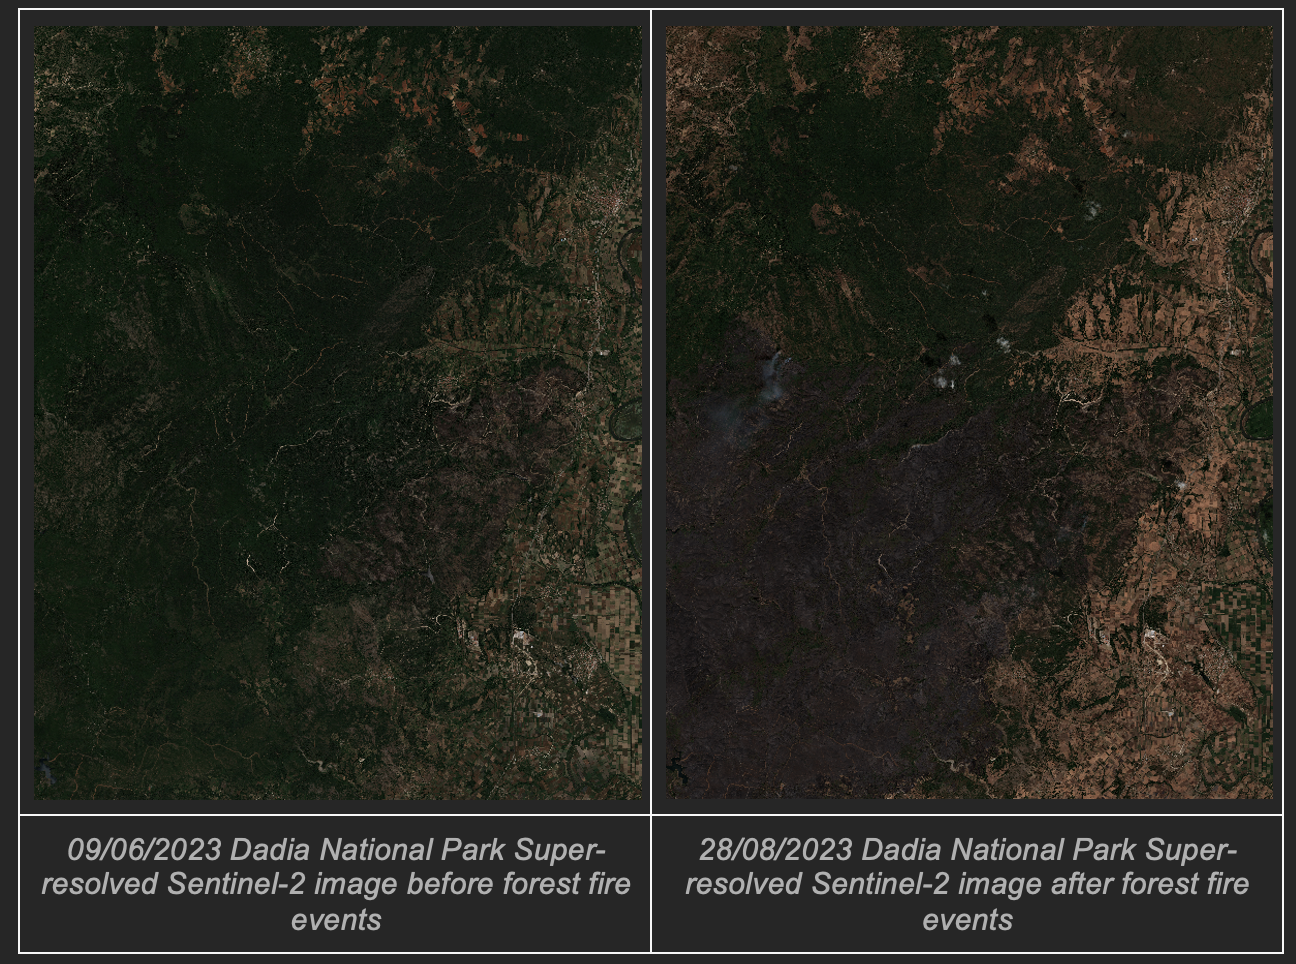 Sentinel-2 images before and after forest fire